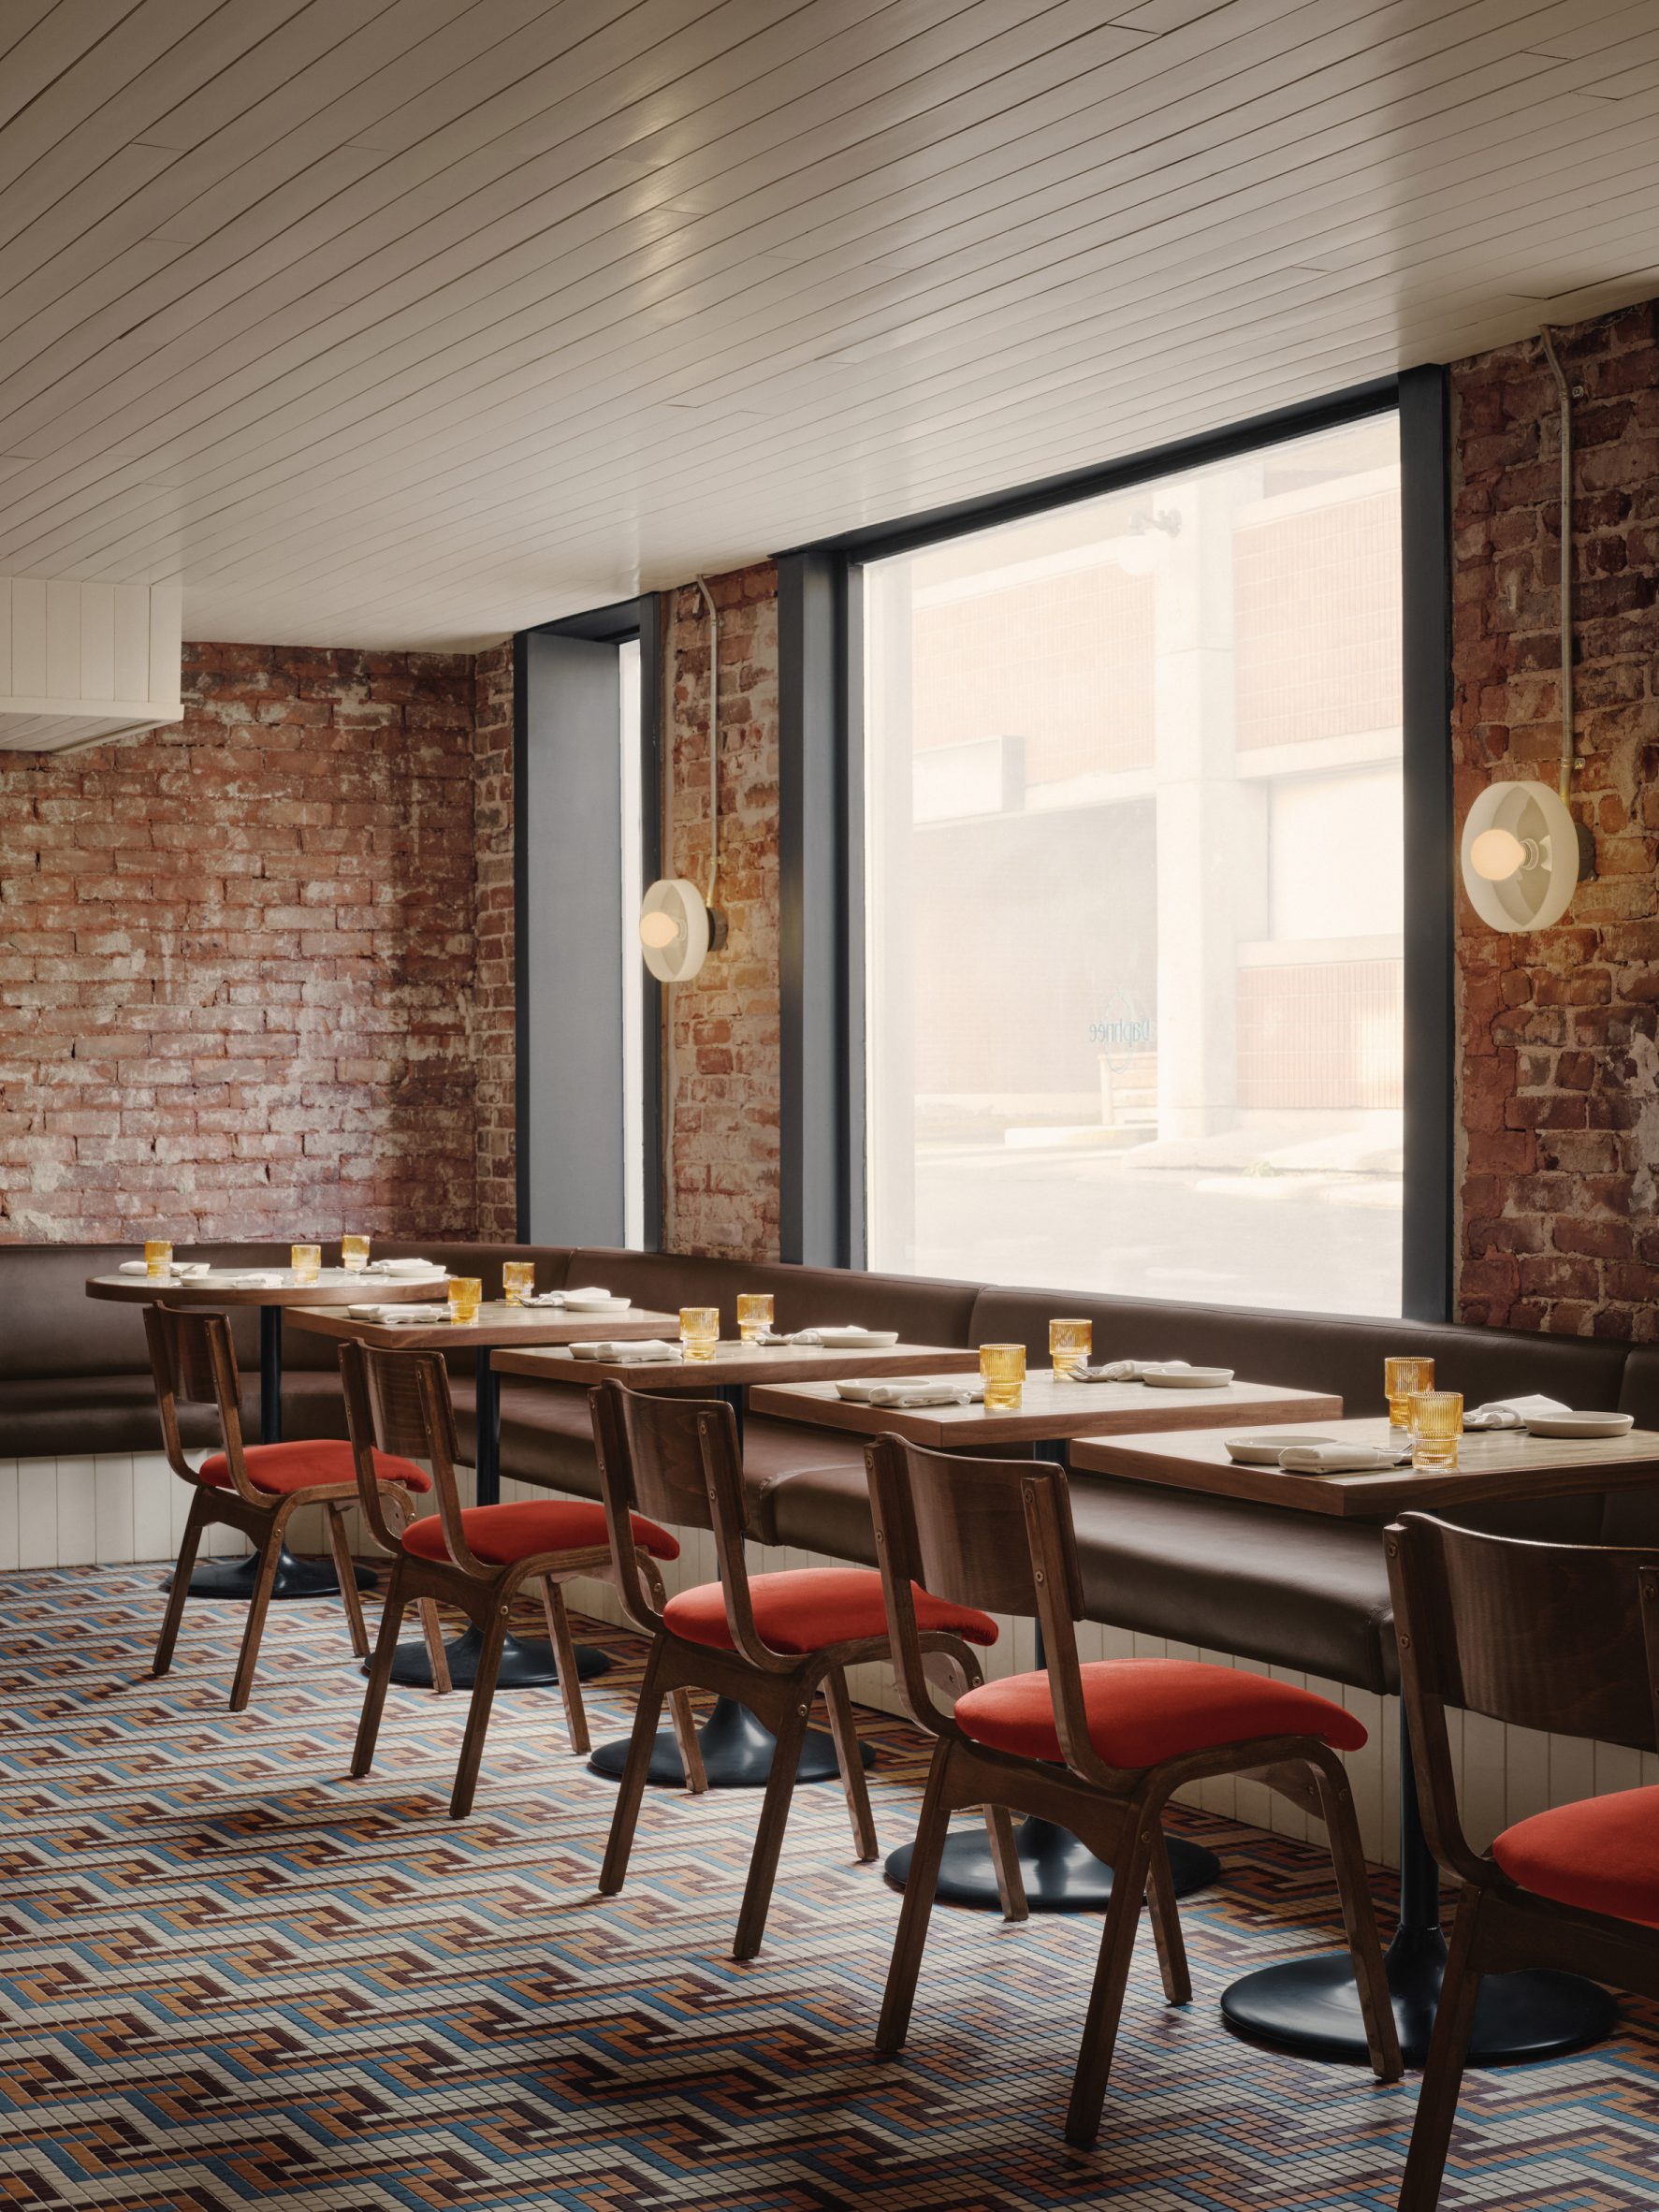 Restaurant interior with glossy cream ceiling, exposed brick walls and brown banquettes